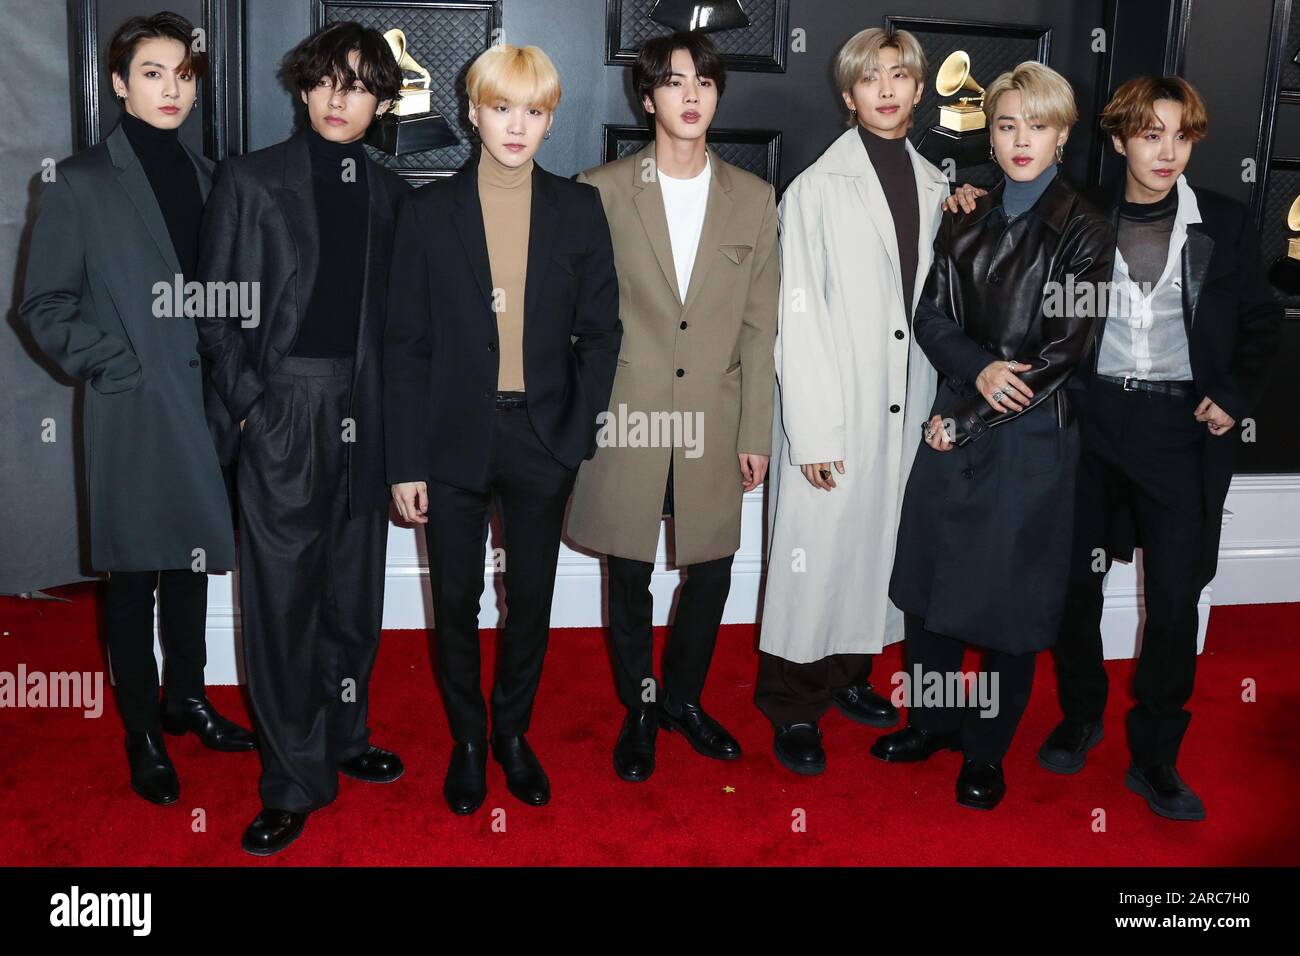 Los Angeles, United States. 26th Jan, 2020. LOS ANGELES, CALIFORNIA, USA - JANUARY 26: RM, V, Suga, Jin, Jimin, Jungkook and J-Hope of BTS arrive at the 62nd Annual GRAMMY Awards held at Staples Center on January 26, 2020 in Los Angeles, California, United States. (Photo by Xavier Collin/Image Press Agency) Credit: Image Press Agency/Alamy Live News Stock Photo